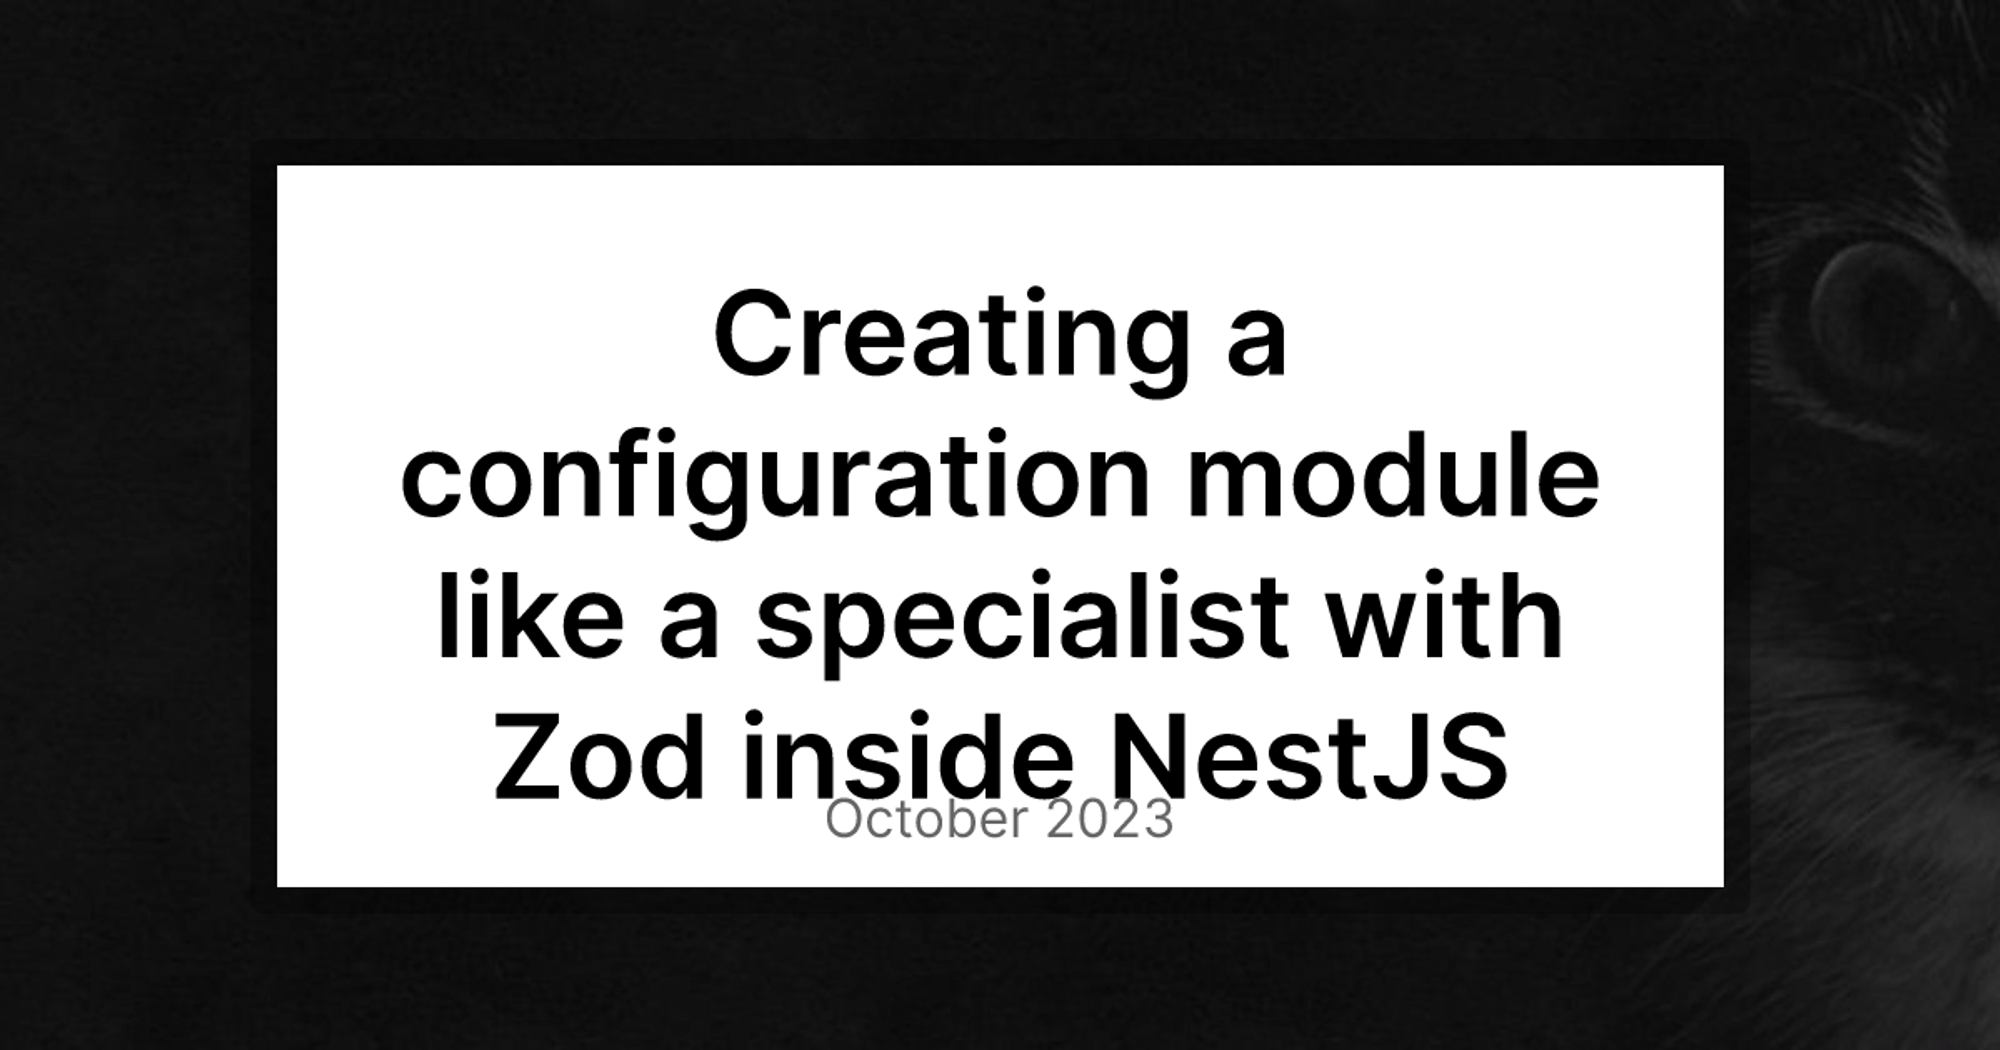 Creating a configuration module like a specialist with Zod inside NestJS